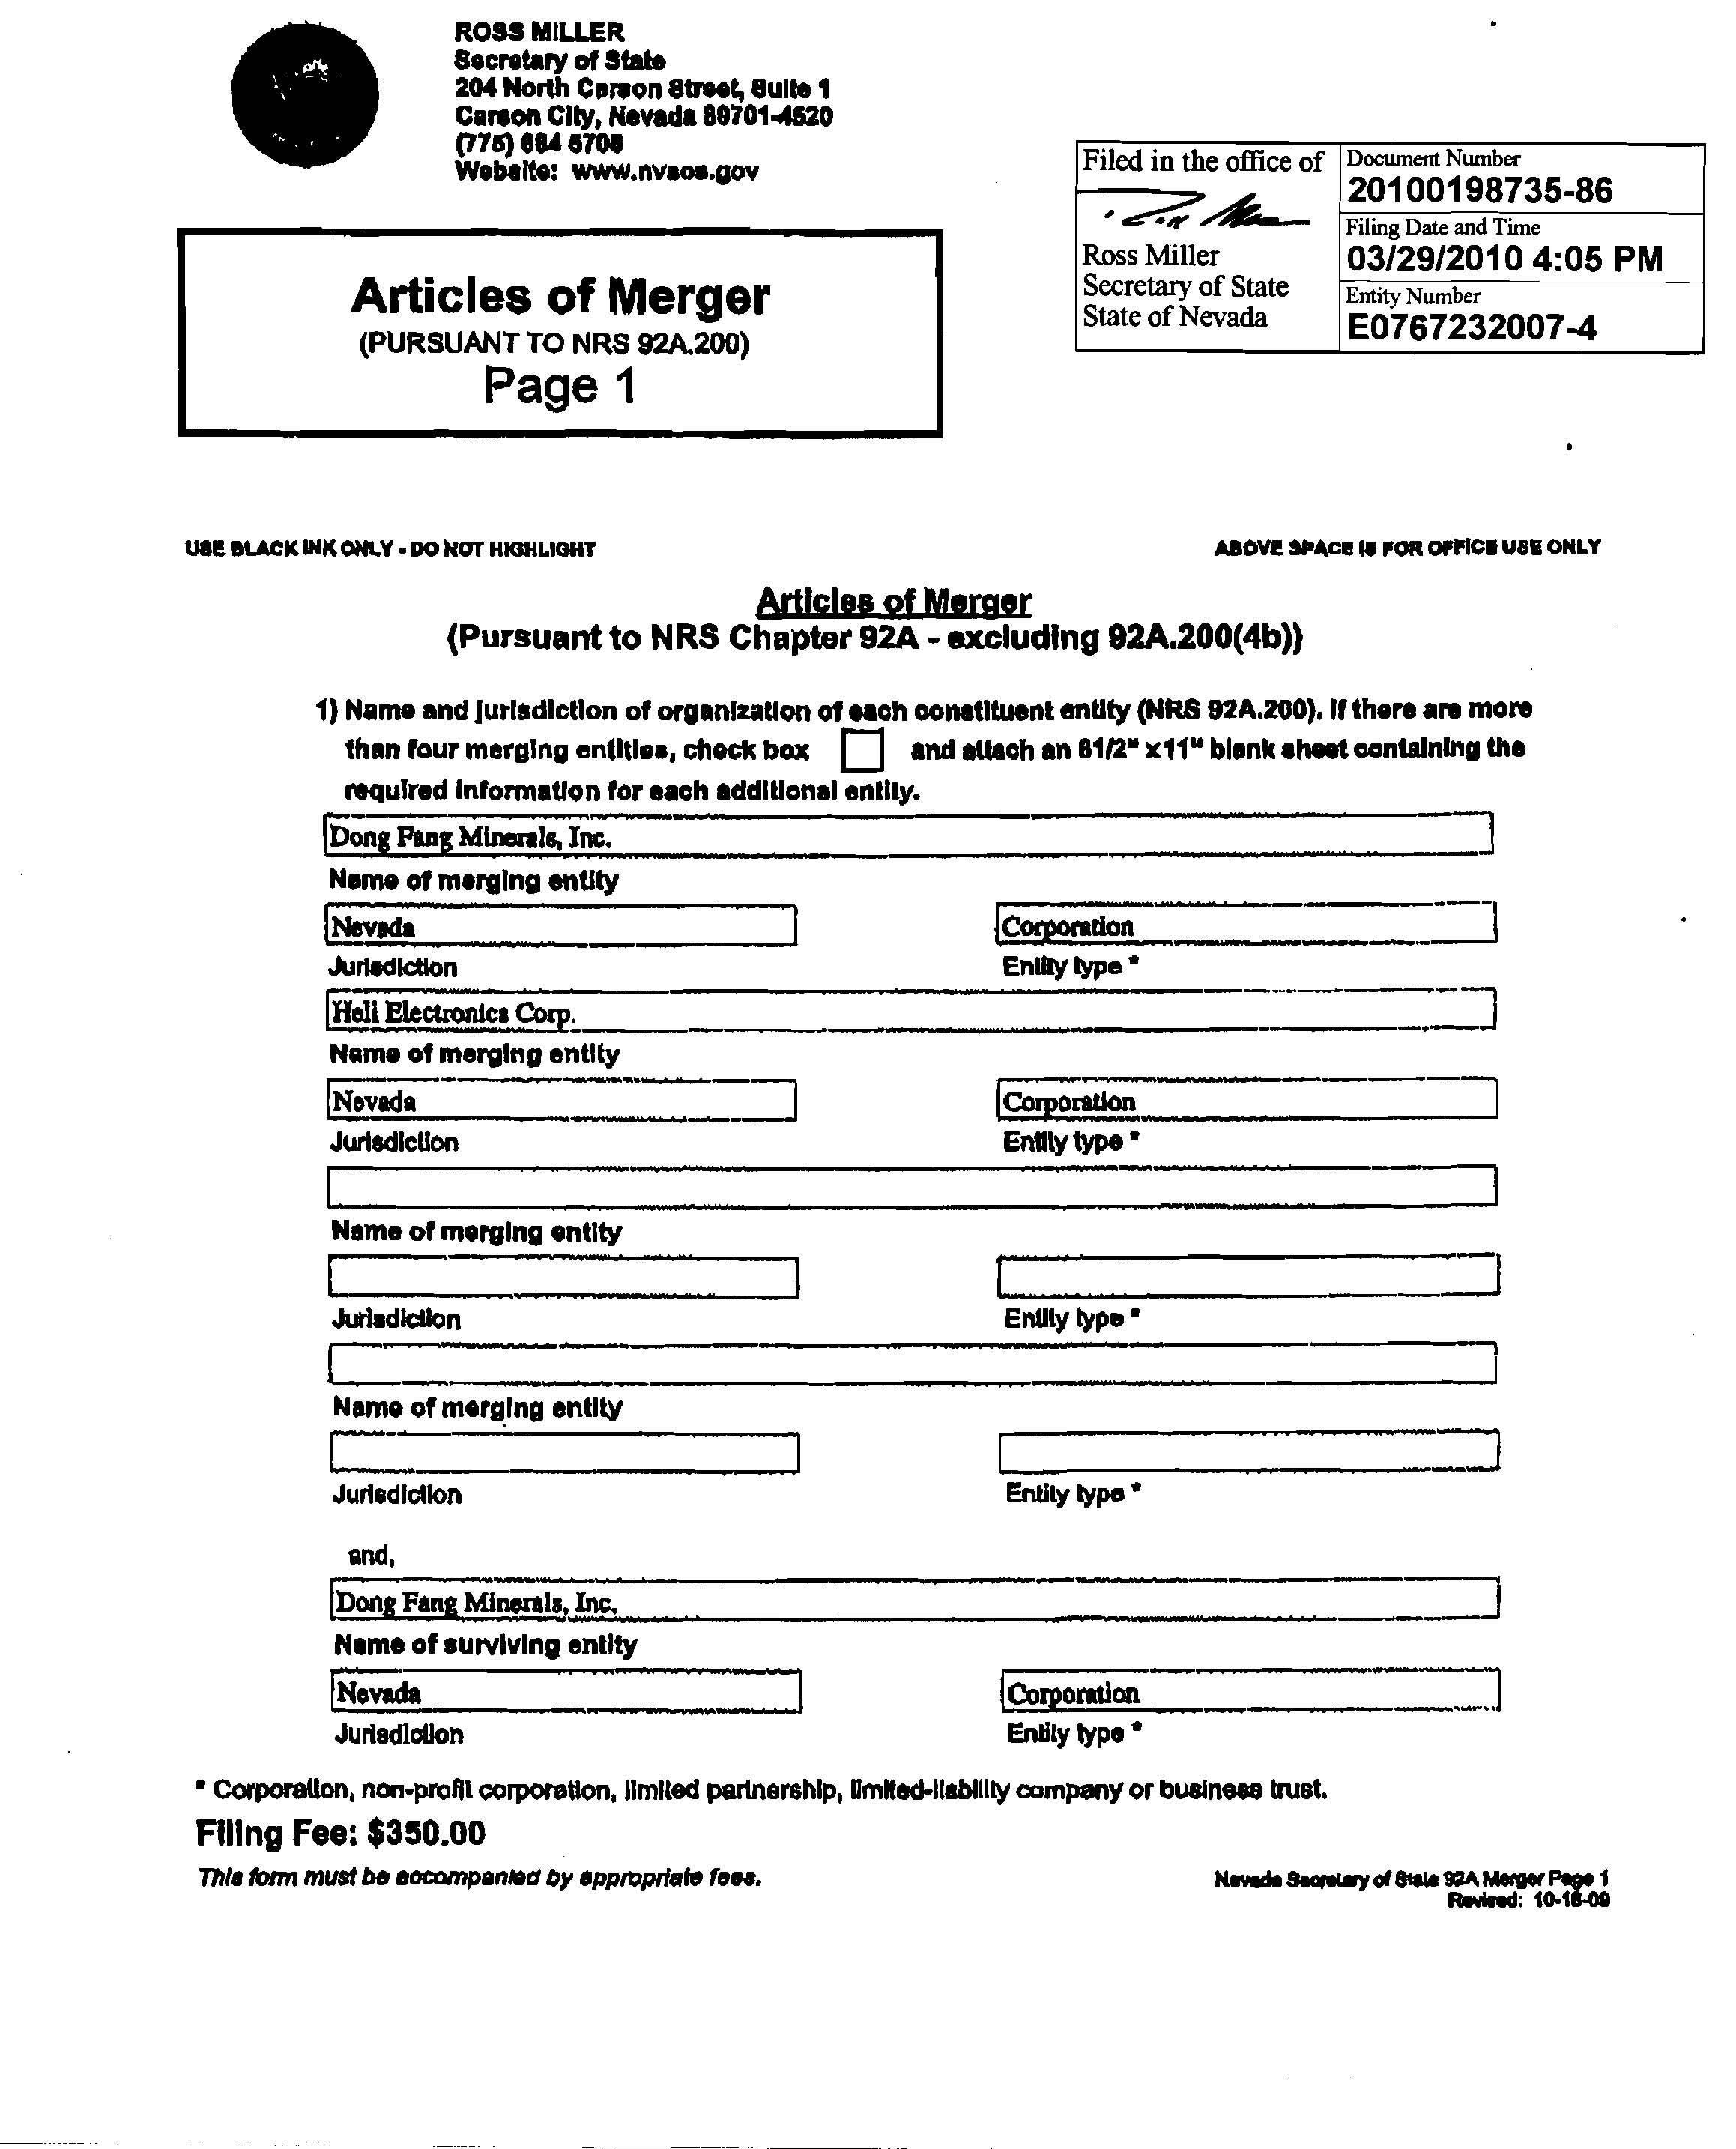 Articles of Merger - Page 1.